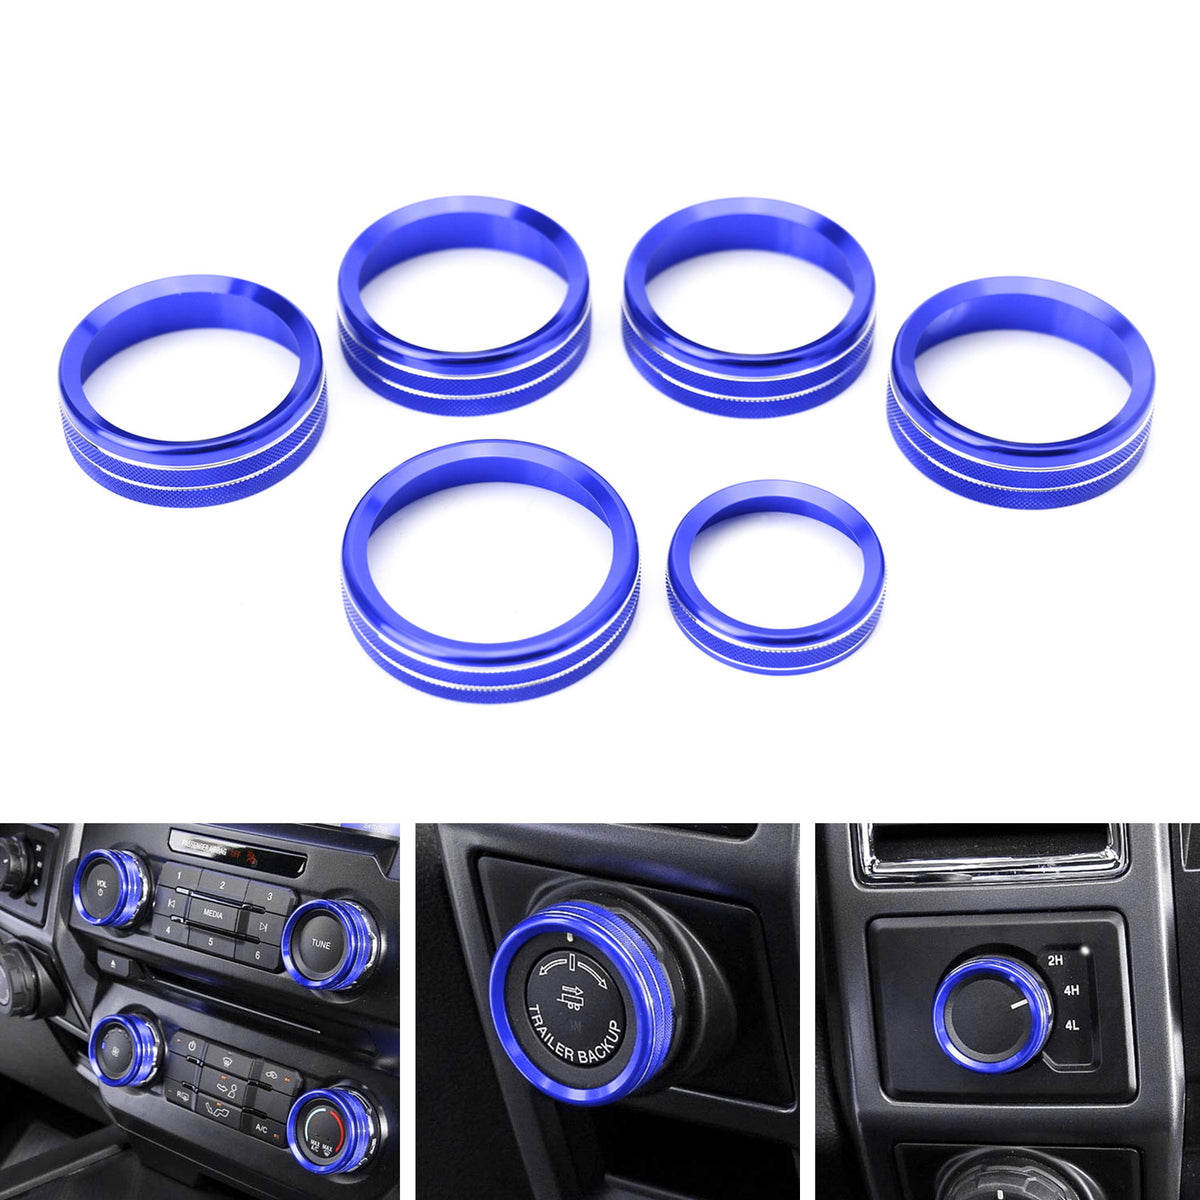 AC Stereo Volume/Tune Trailer Switch Knob Ring Covers For 2017-20 F250 — 